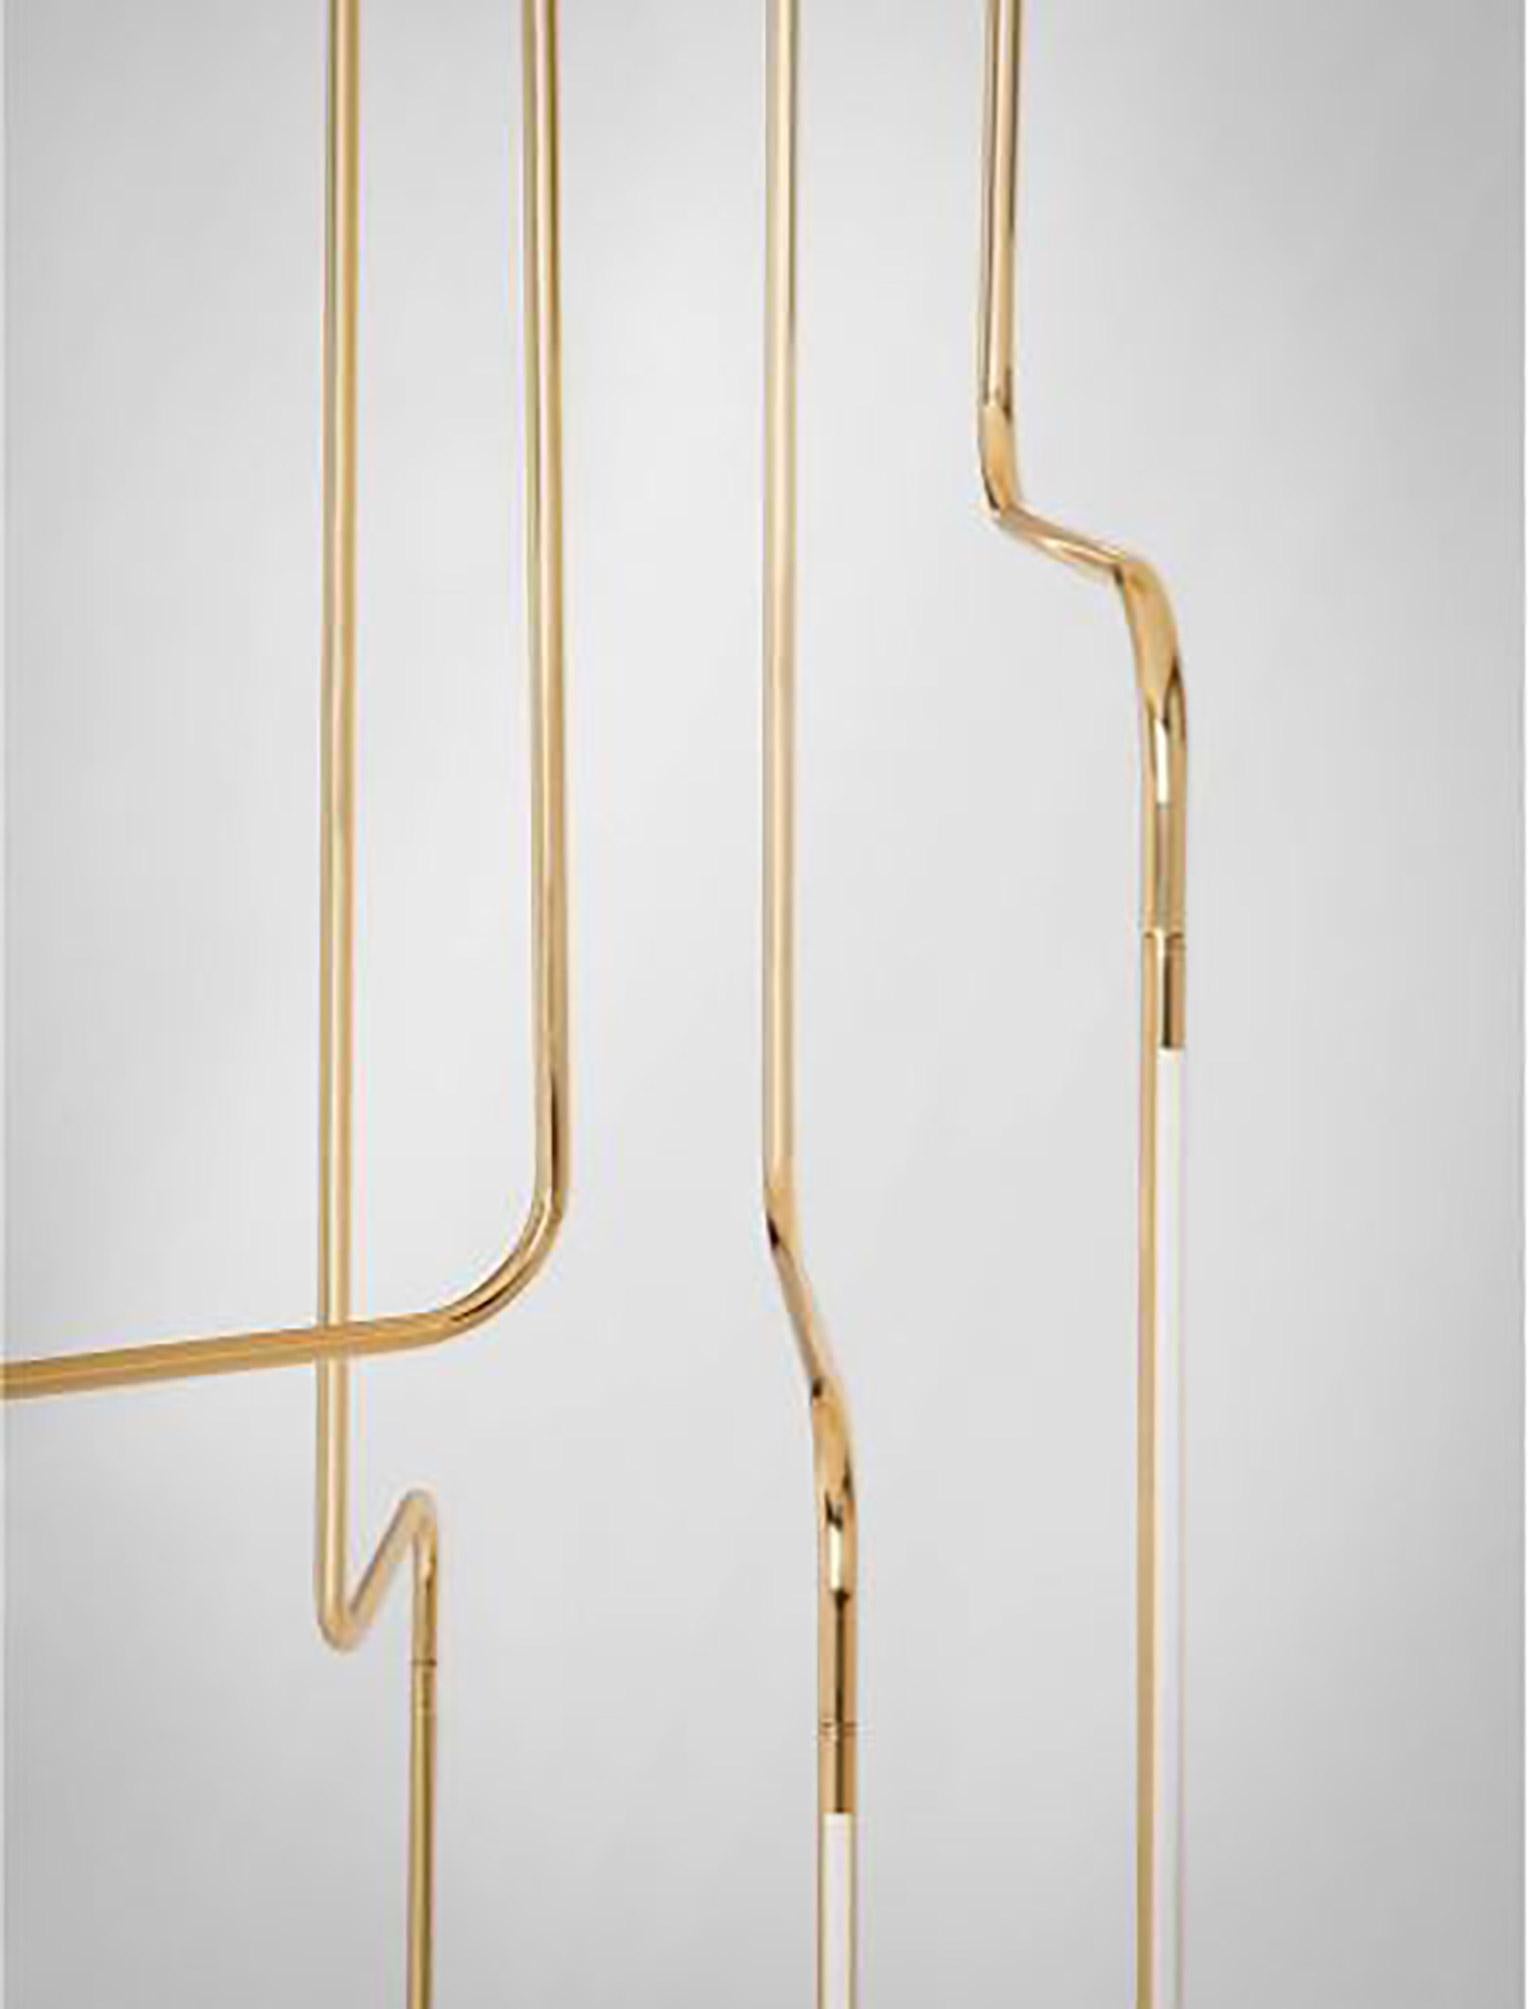 SEM Gold collection, four arms composition ceiling lamp in polished or fine brushed tubular brass with the double joint. Different sizes and compositions: H 110/155/175 cm. Horizontal arm length measurement of 20 cm. Lamp type LED 6W - 3000°K